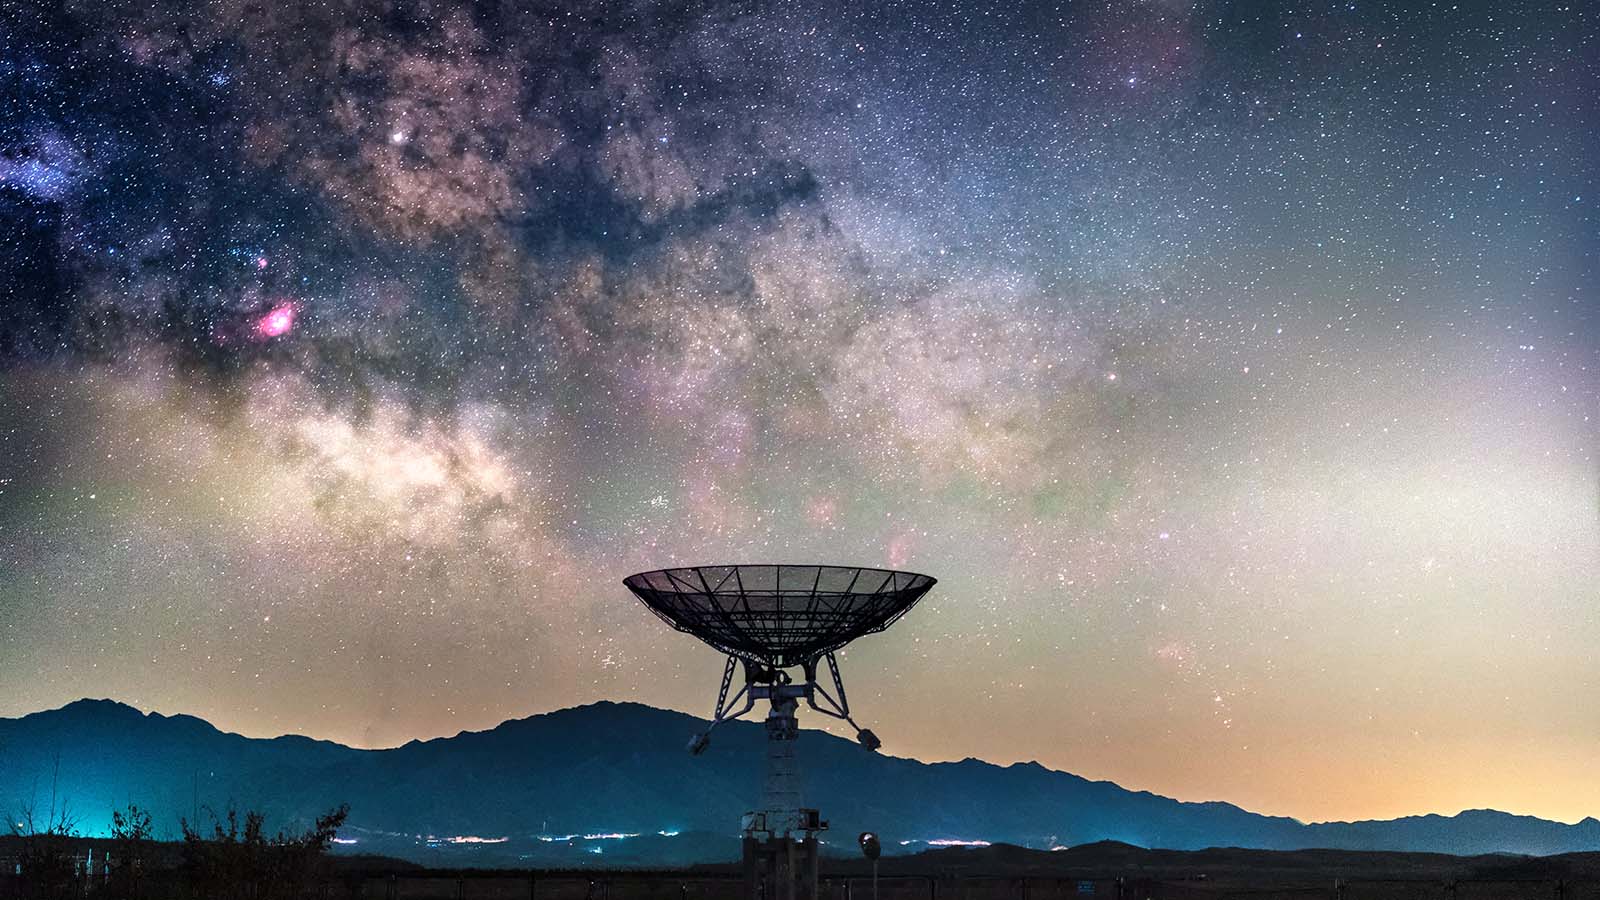 The Milky Way is seen above a radio telescope.